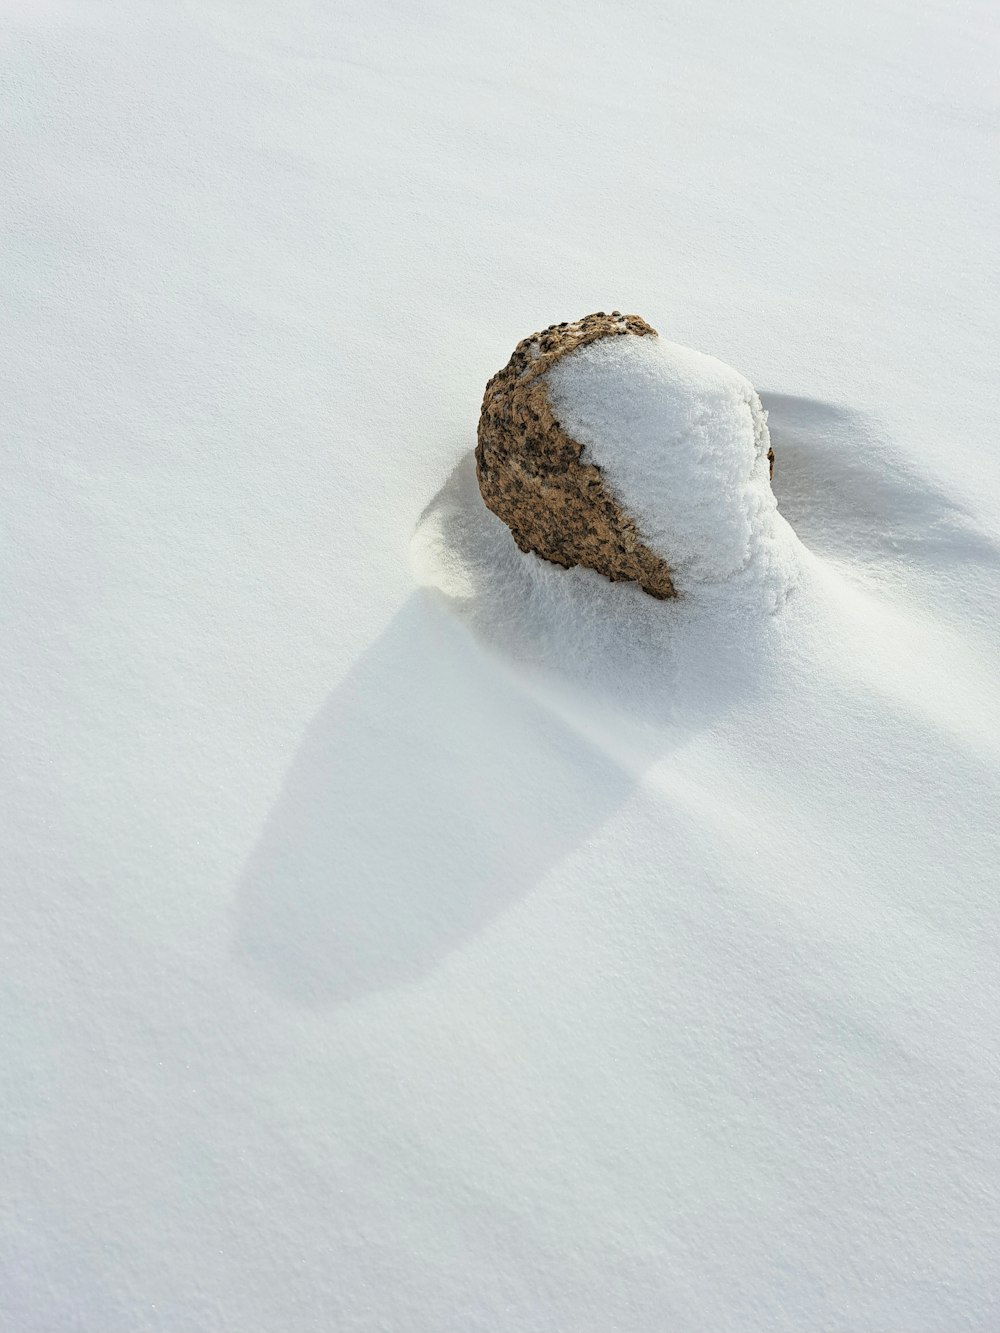 a rock covered in snow on a snowy surface